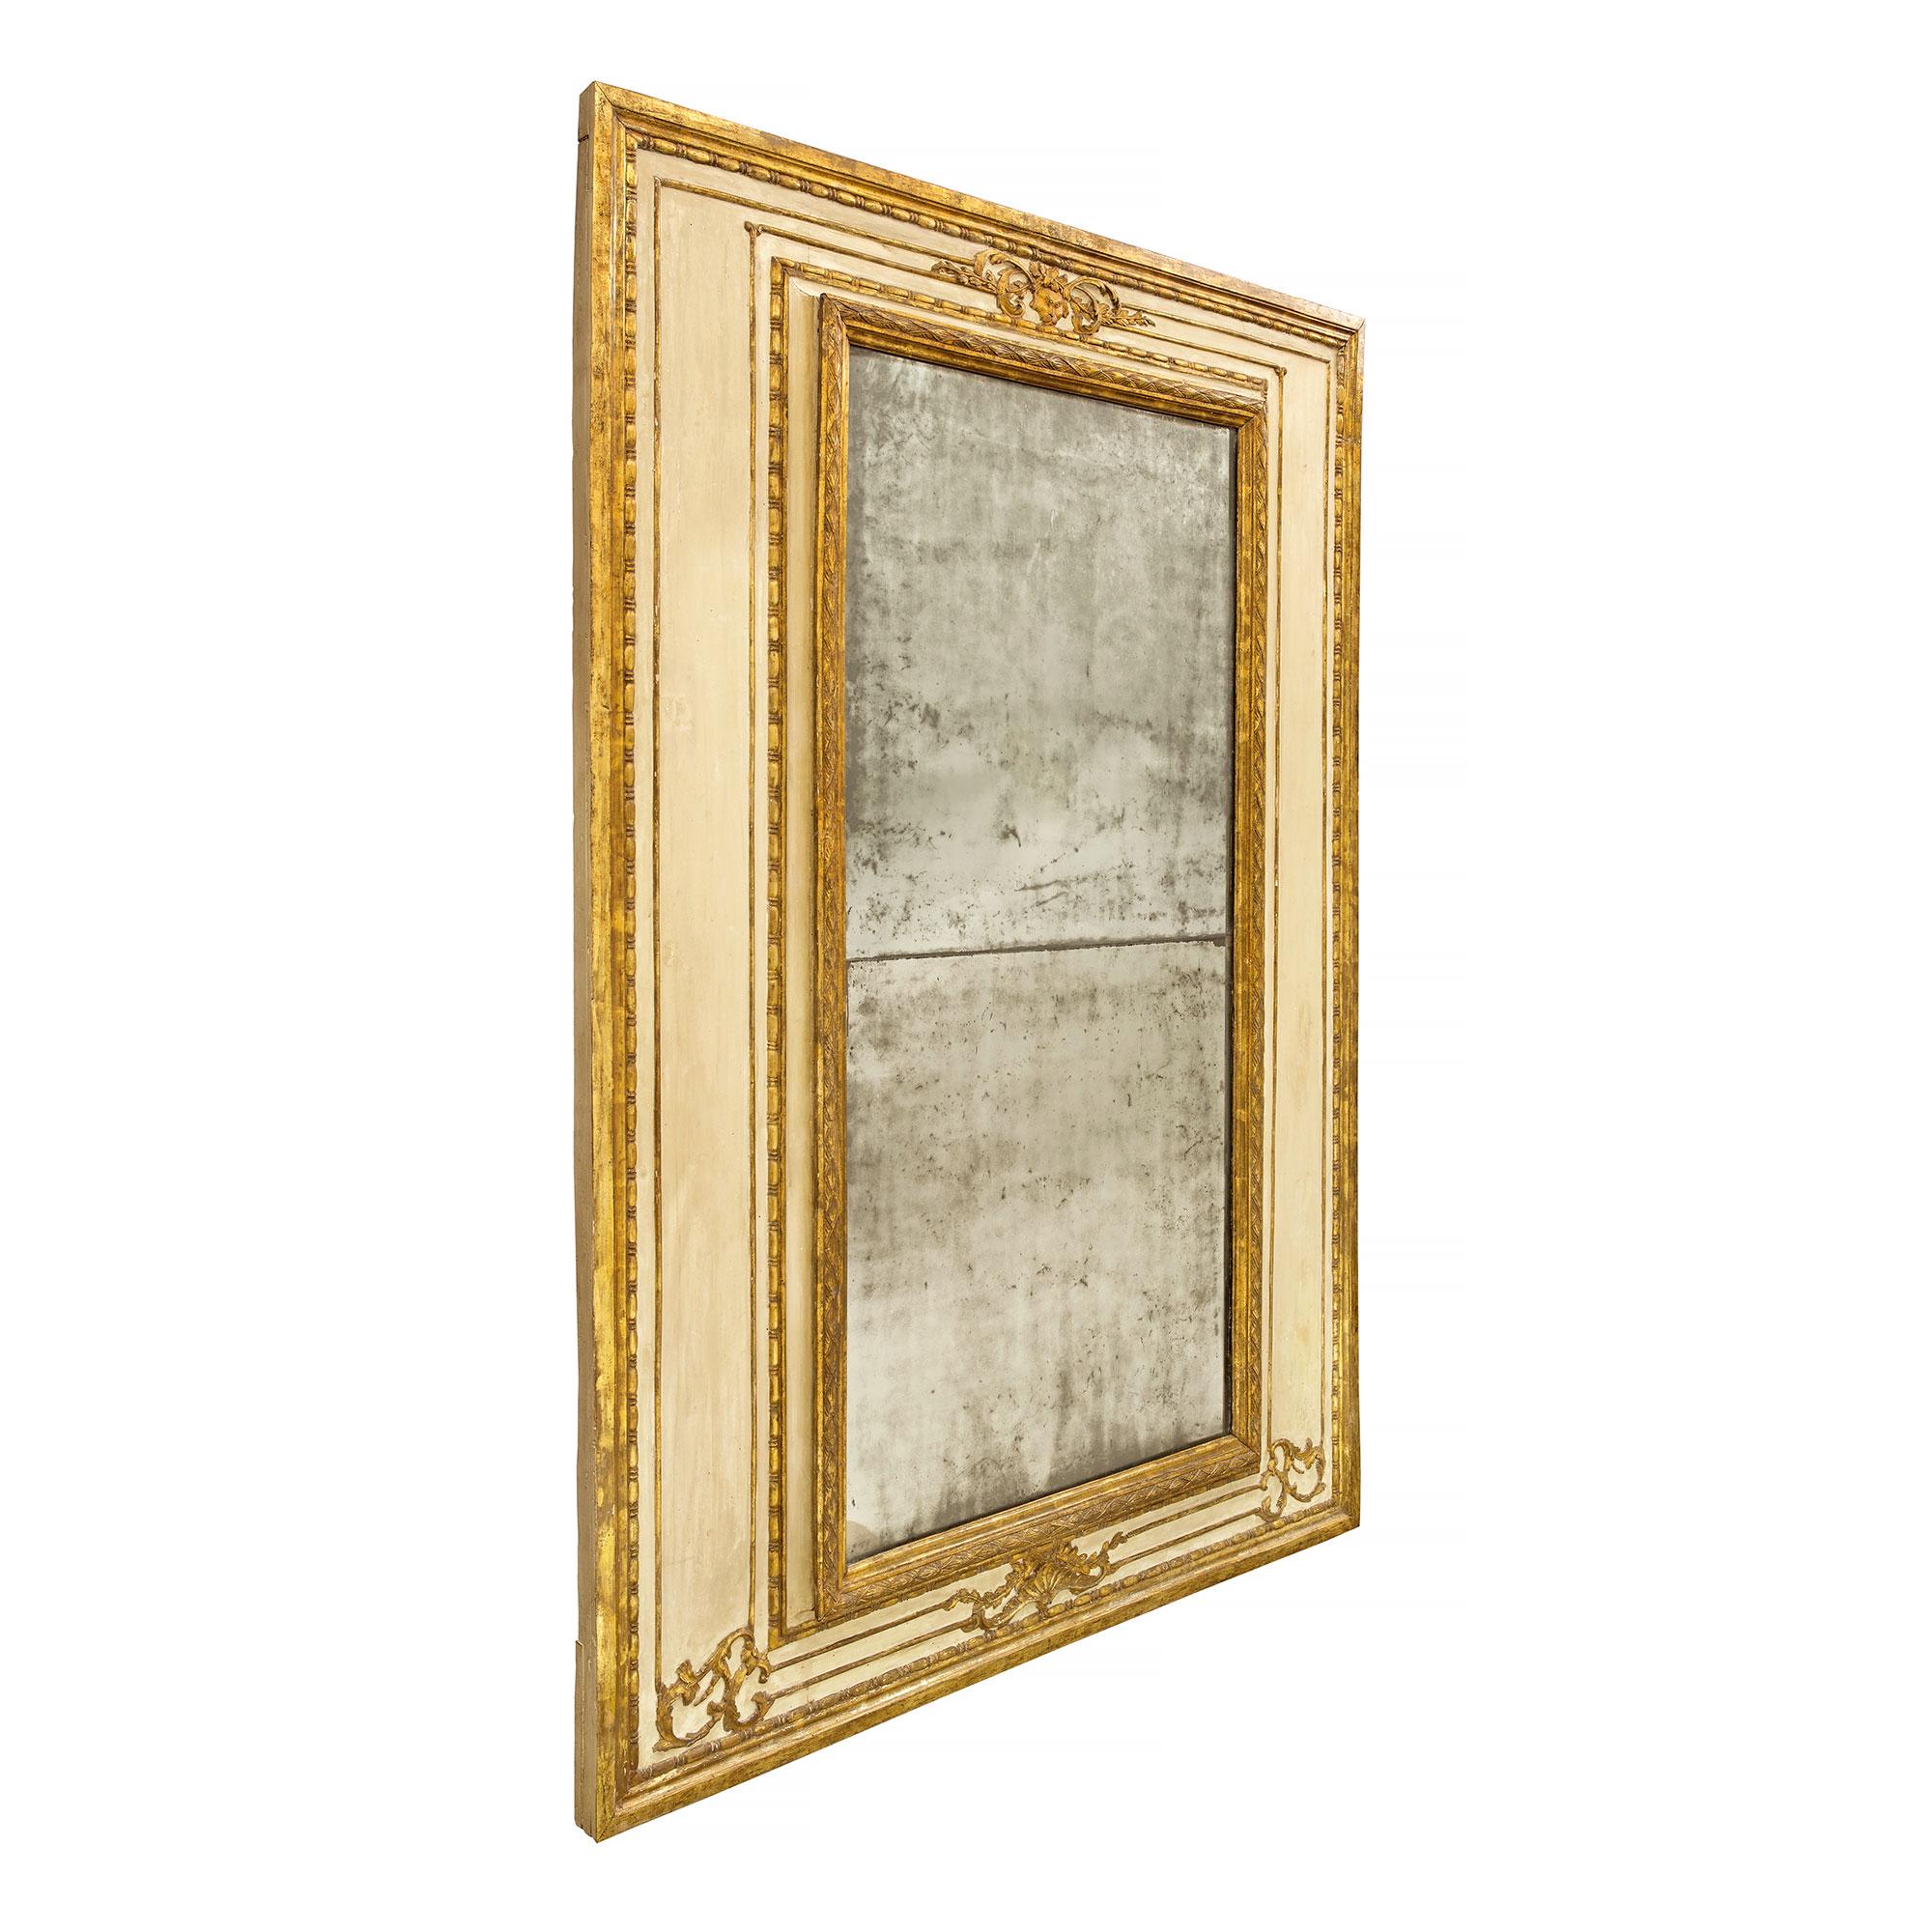 Italian 18th Century Louis XVI Period Patinated and Mecca Mirror In Good Condition For Sale In West Palm Beach, FL